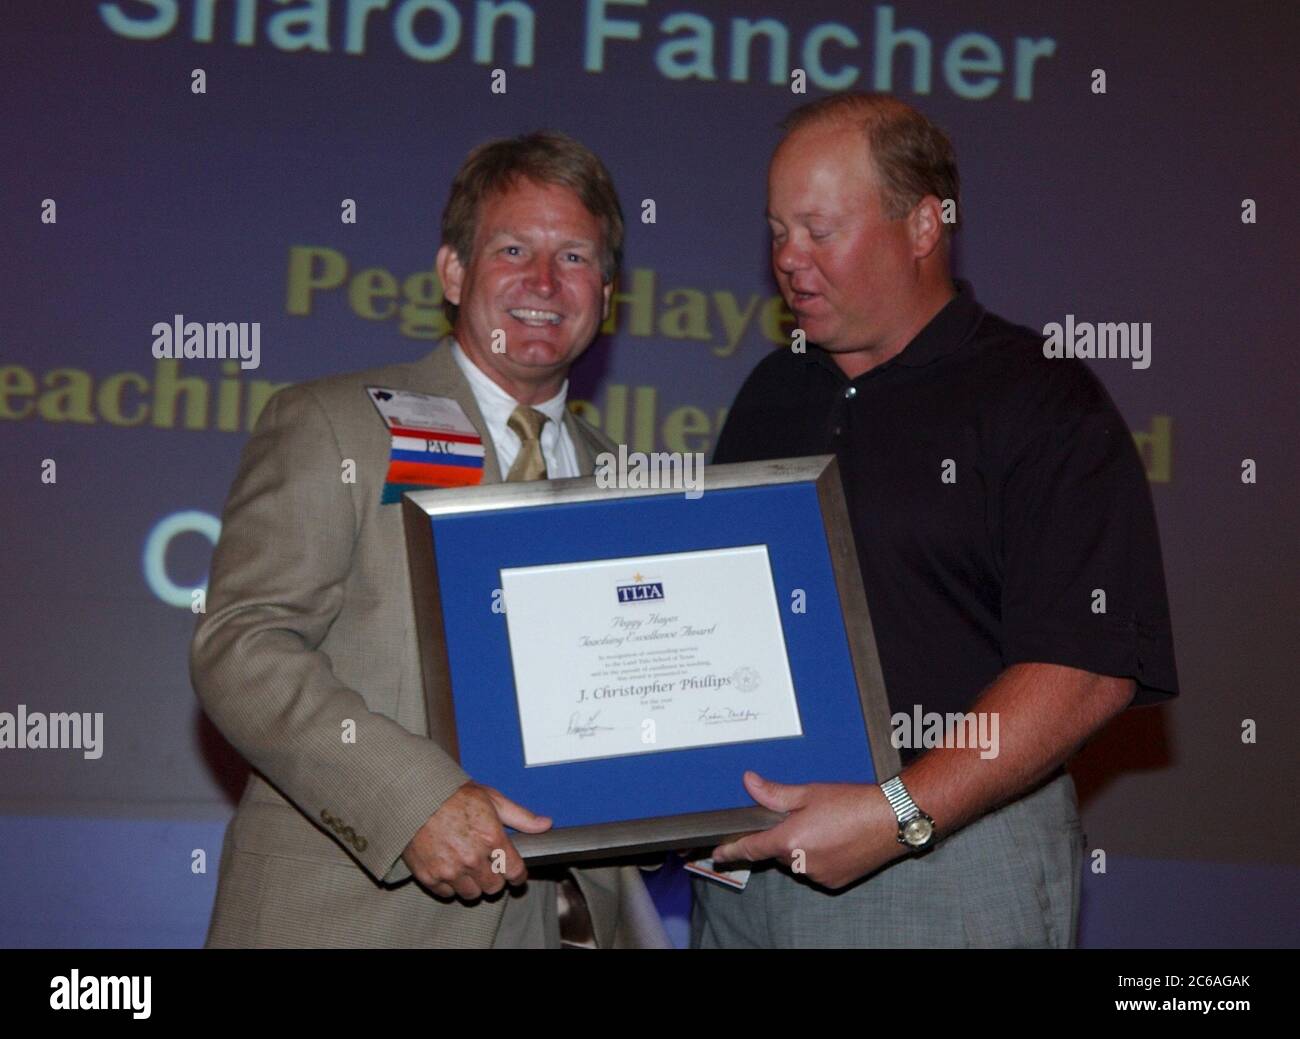 Corpus Christi Texas USA, June, 2004: White male presents award to white male during formal dinner at professional association convention.  ©Bob Daemmrich Stock Photo